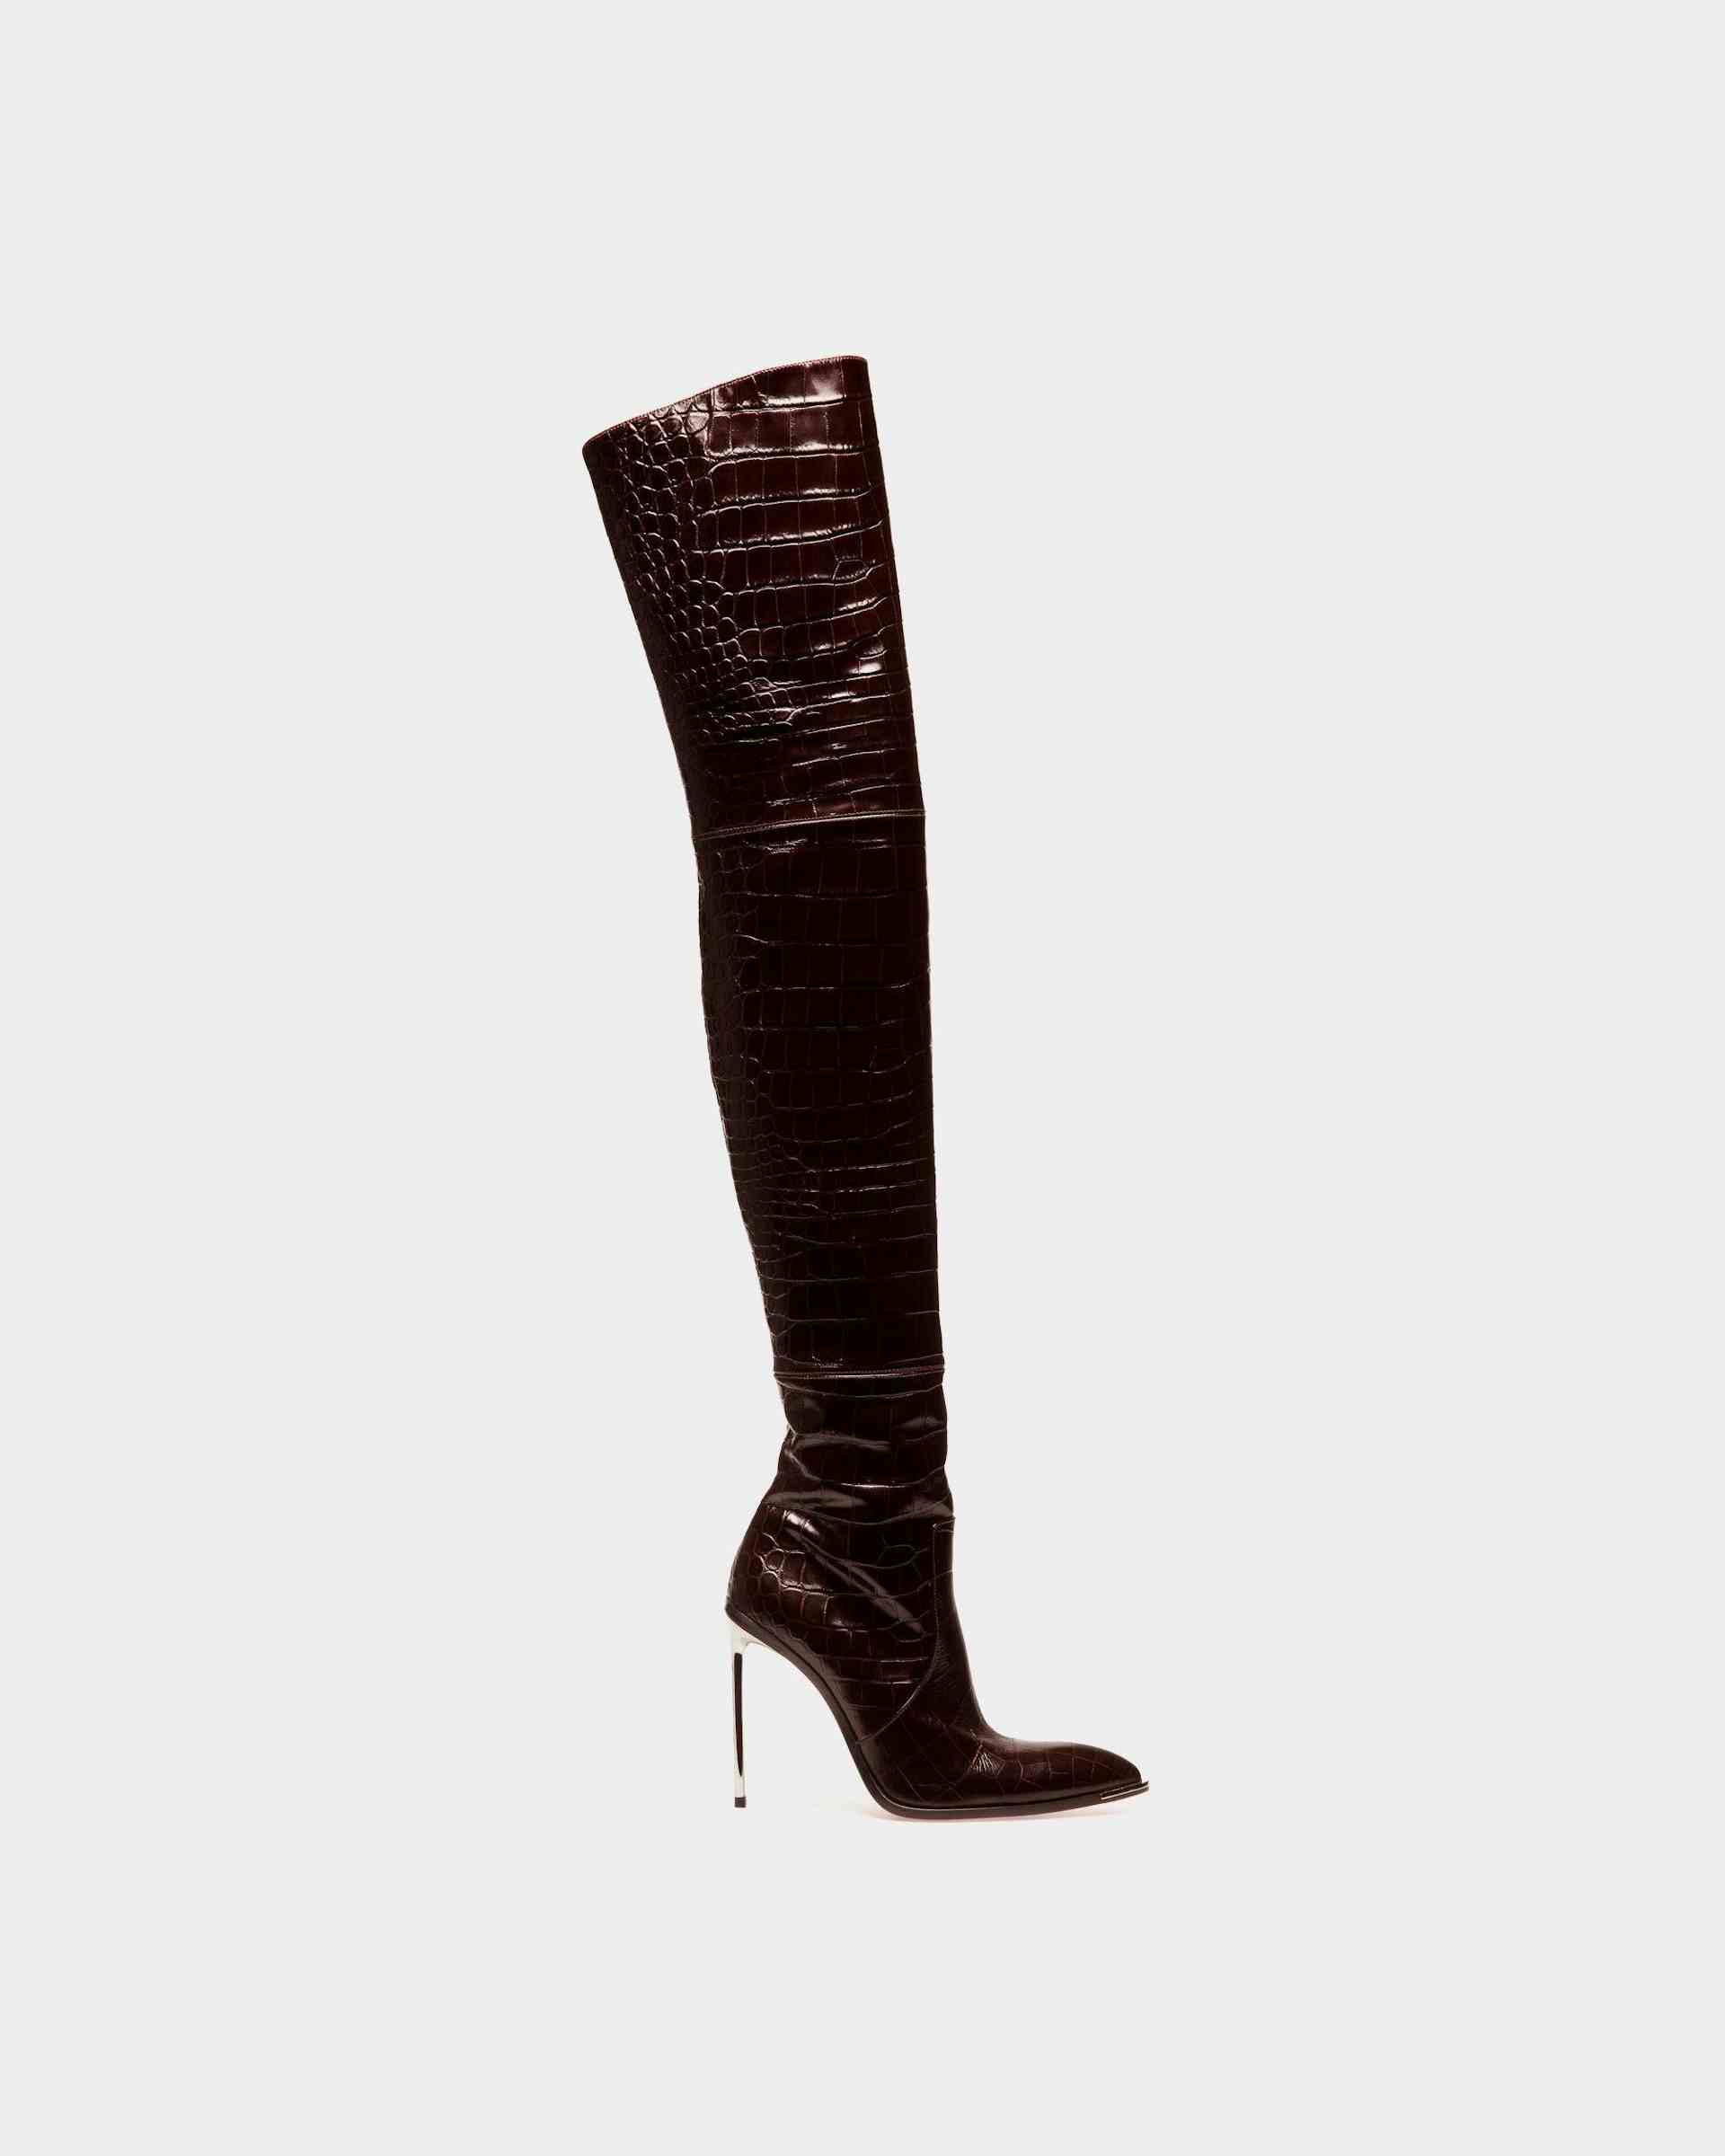 Hedy Long Boots In Burgundy Leather - Women's - Bally